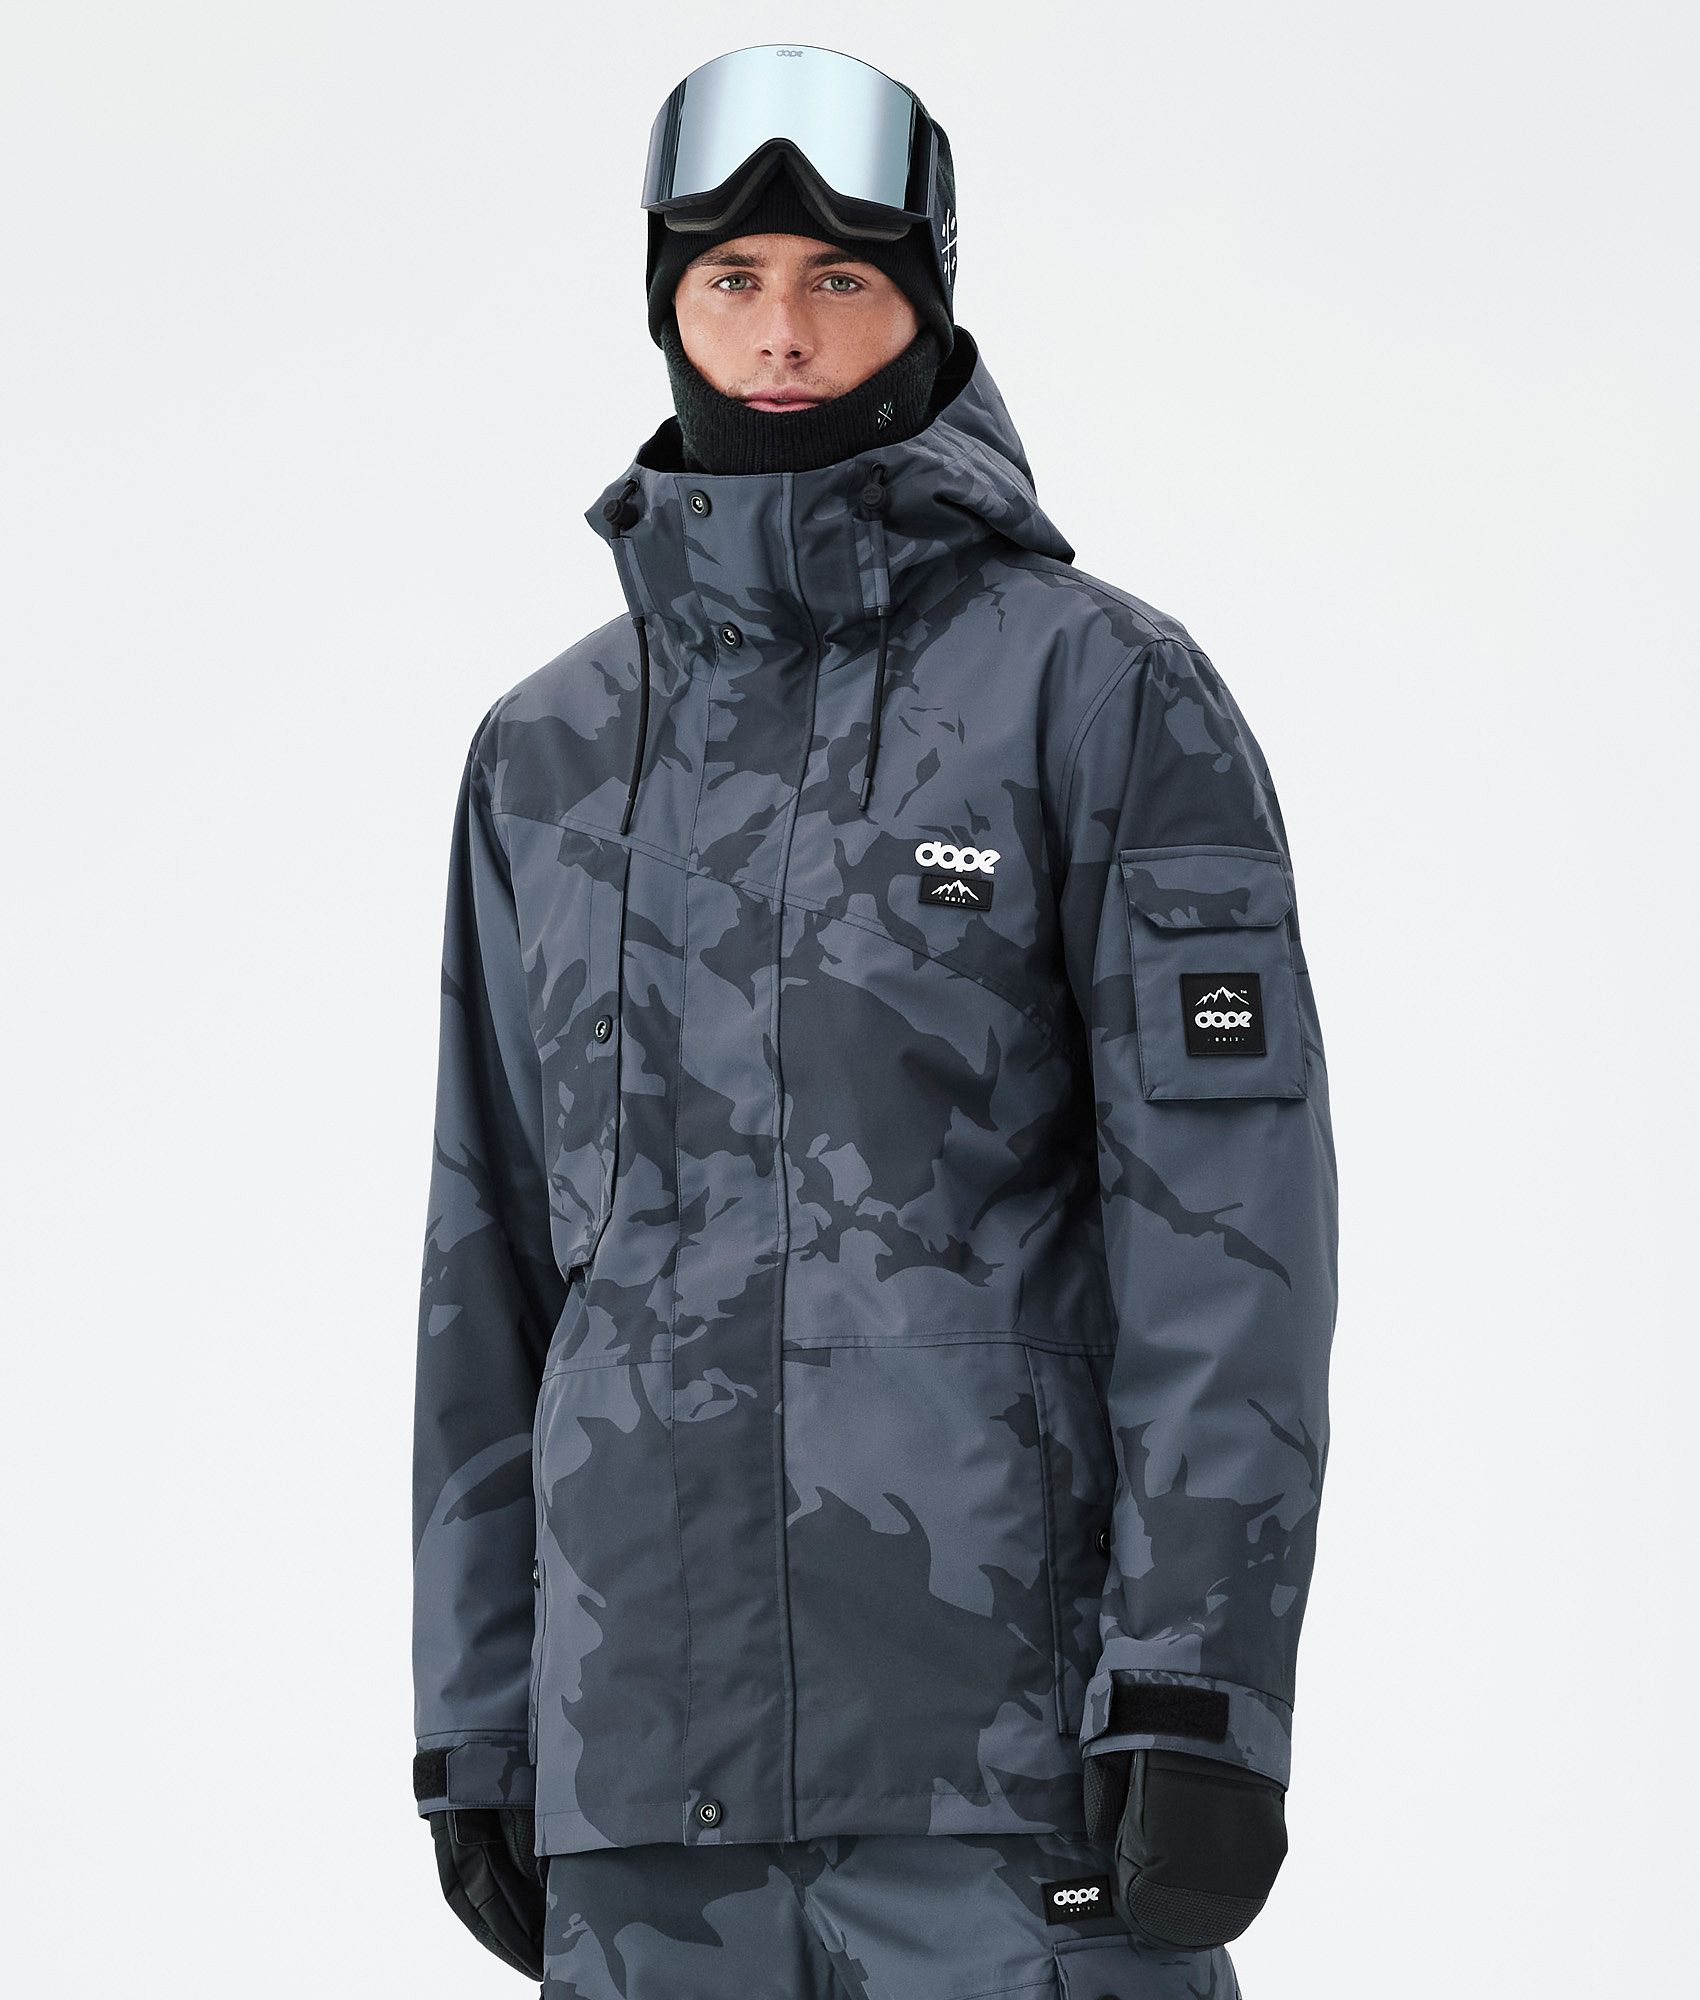 Snow Gear & Outfit Buying Guide | Quiksilver